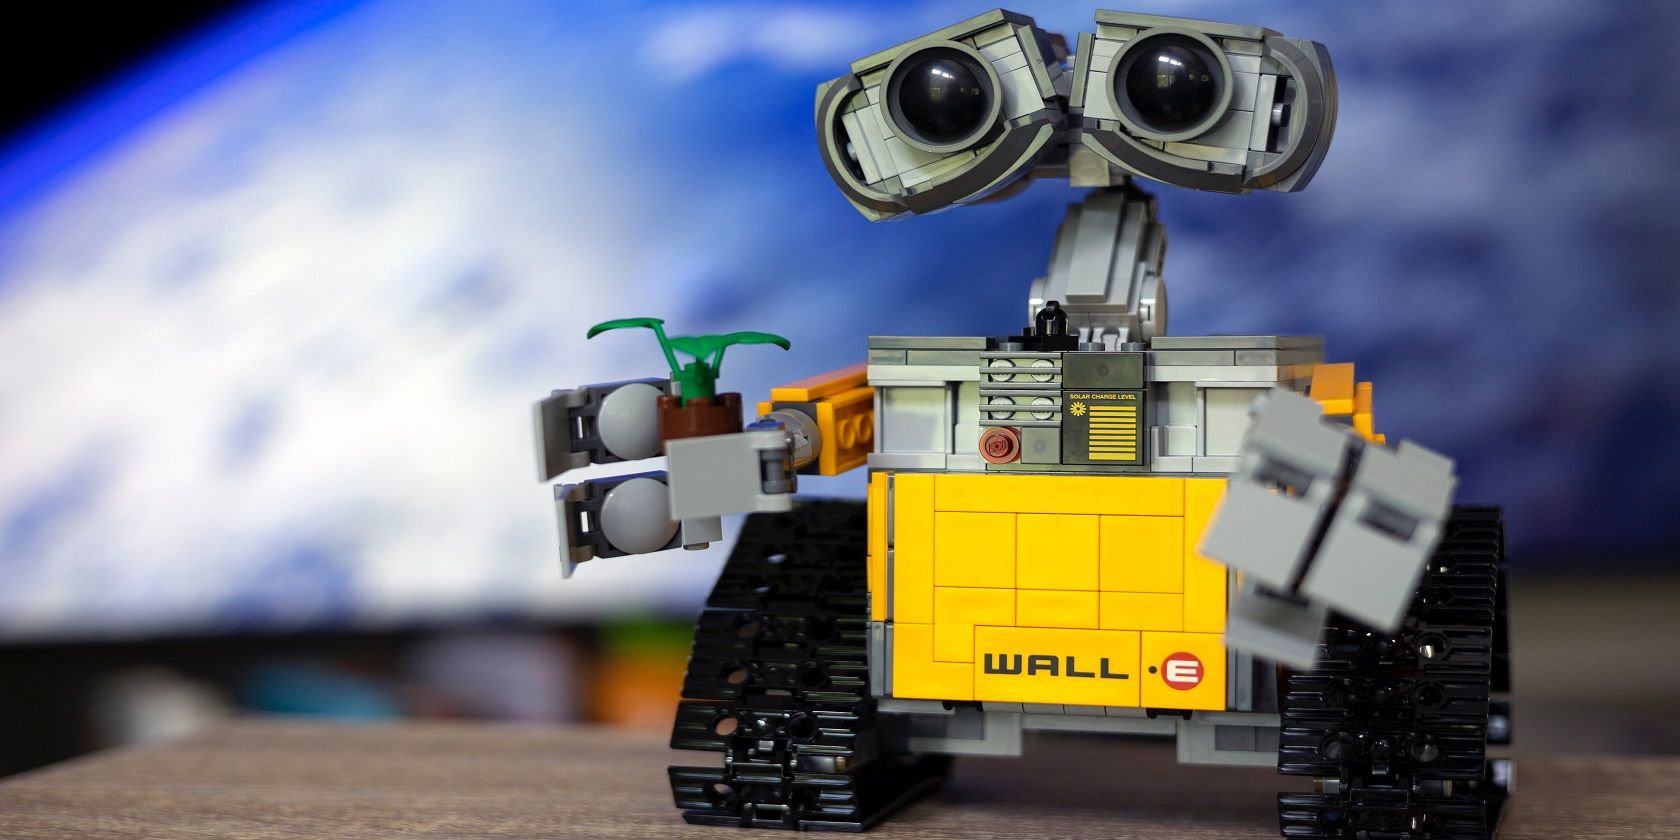 A LEGO robot with two eyes and a camera